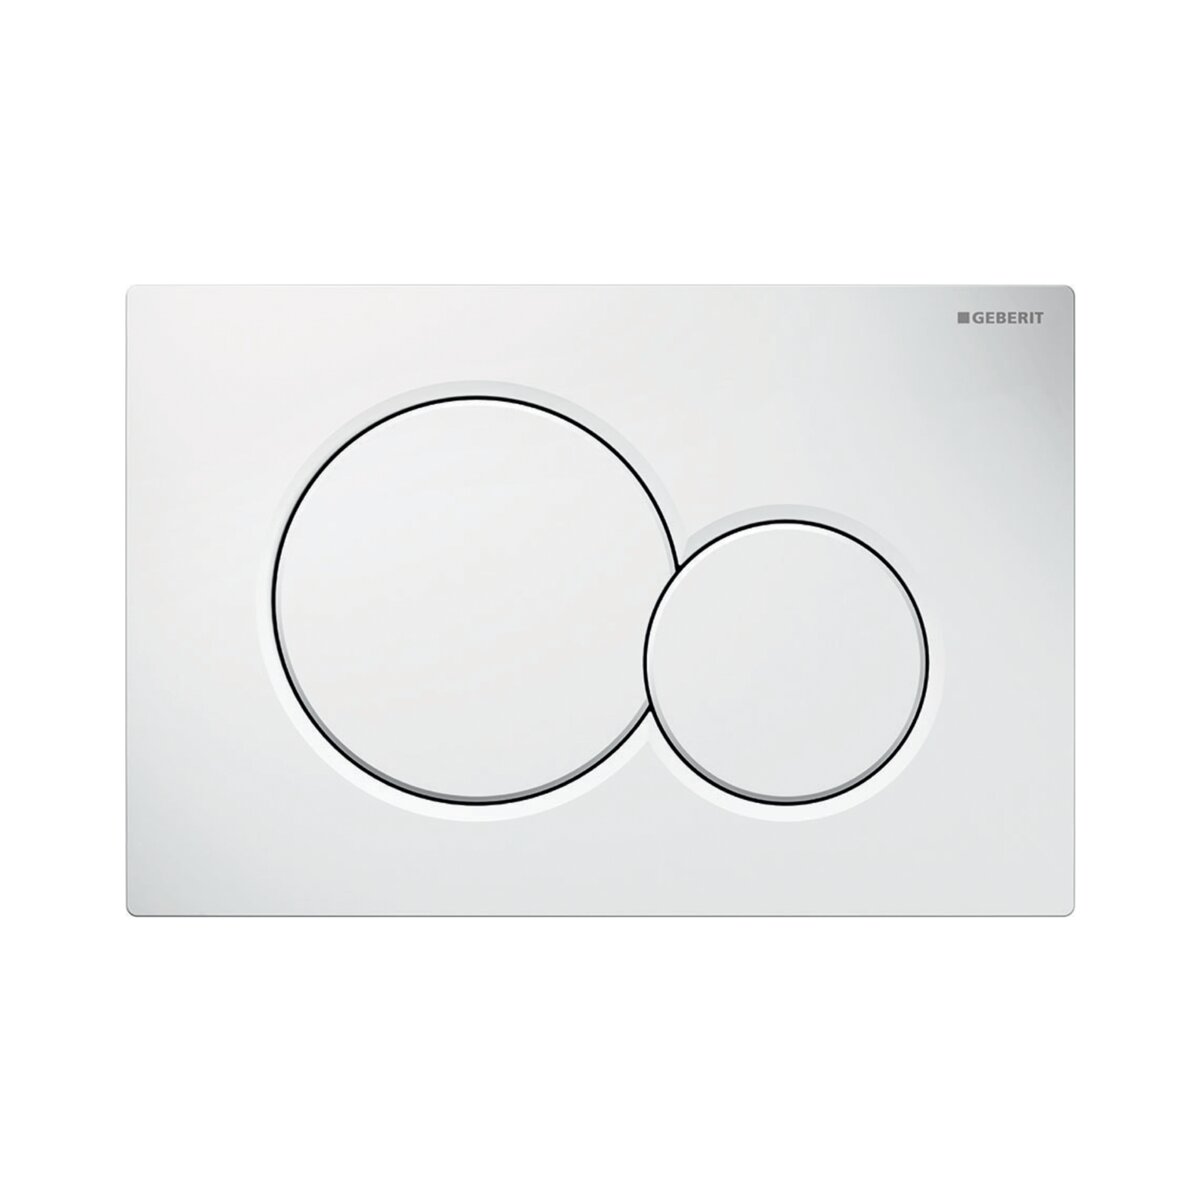 Geberit Sigma 8 built-in cistern with installation module for wall-hung pan + Sigma 01 cover plate